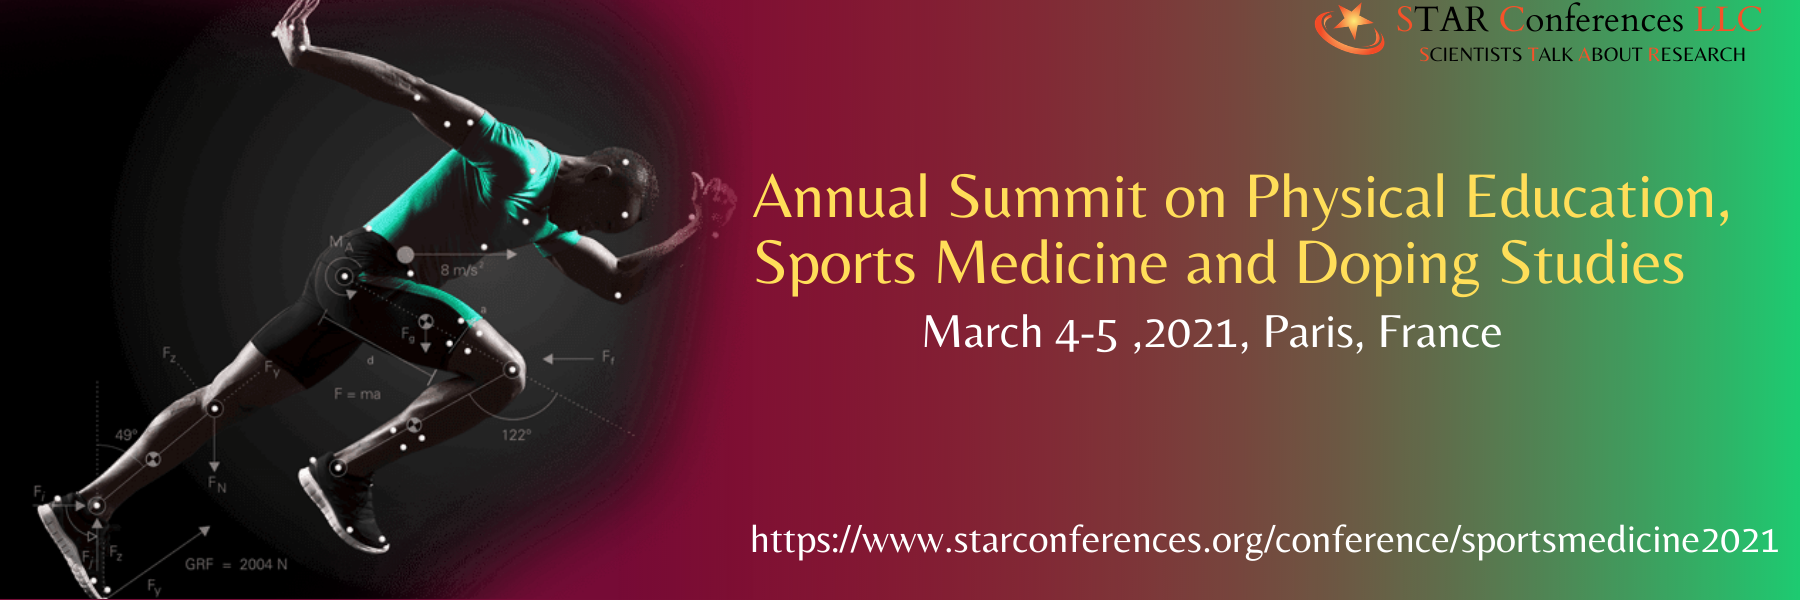 Annual Summit on Physical Education, Sports Medicine and Doping Studies”, Paris, France